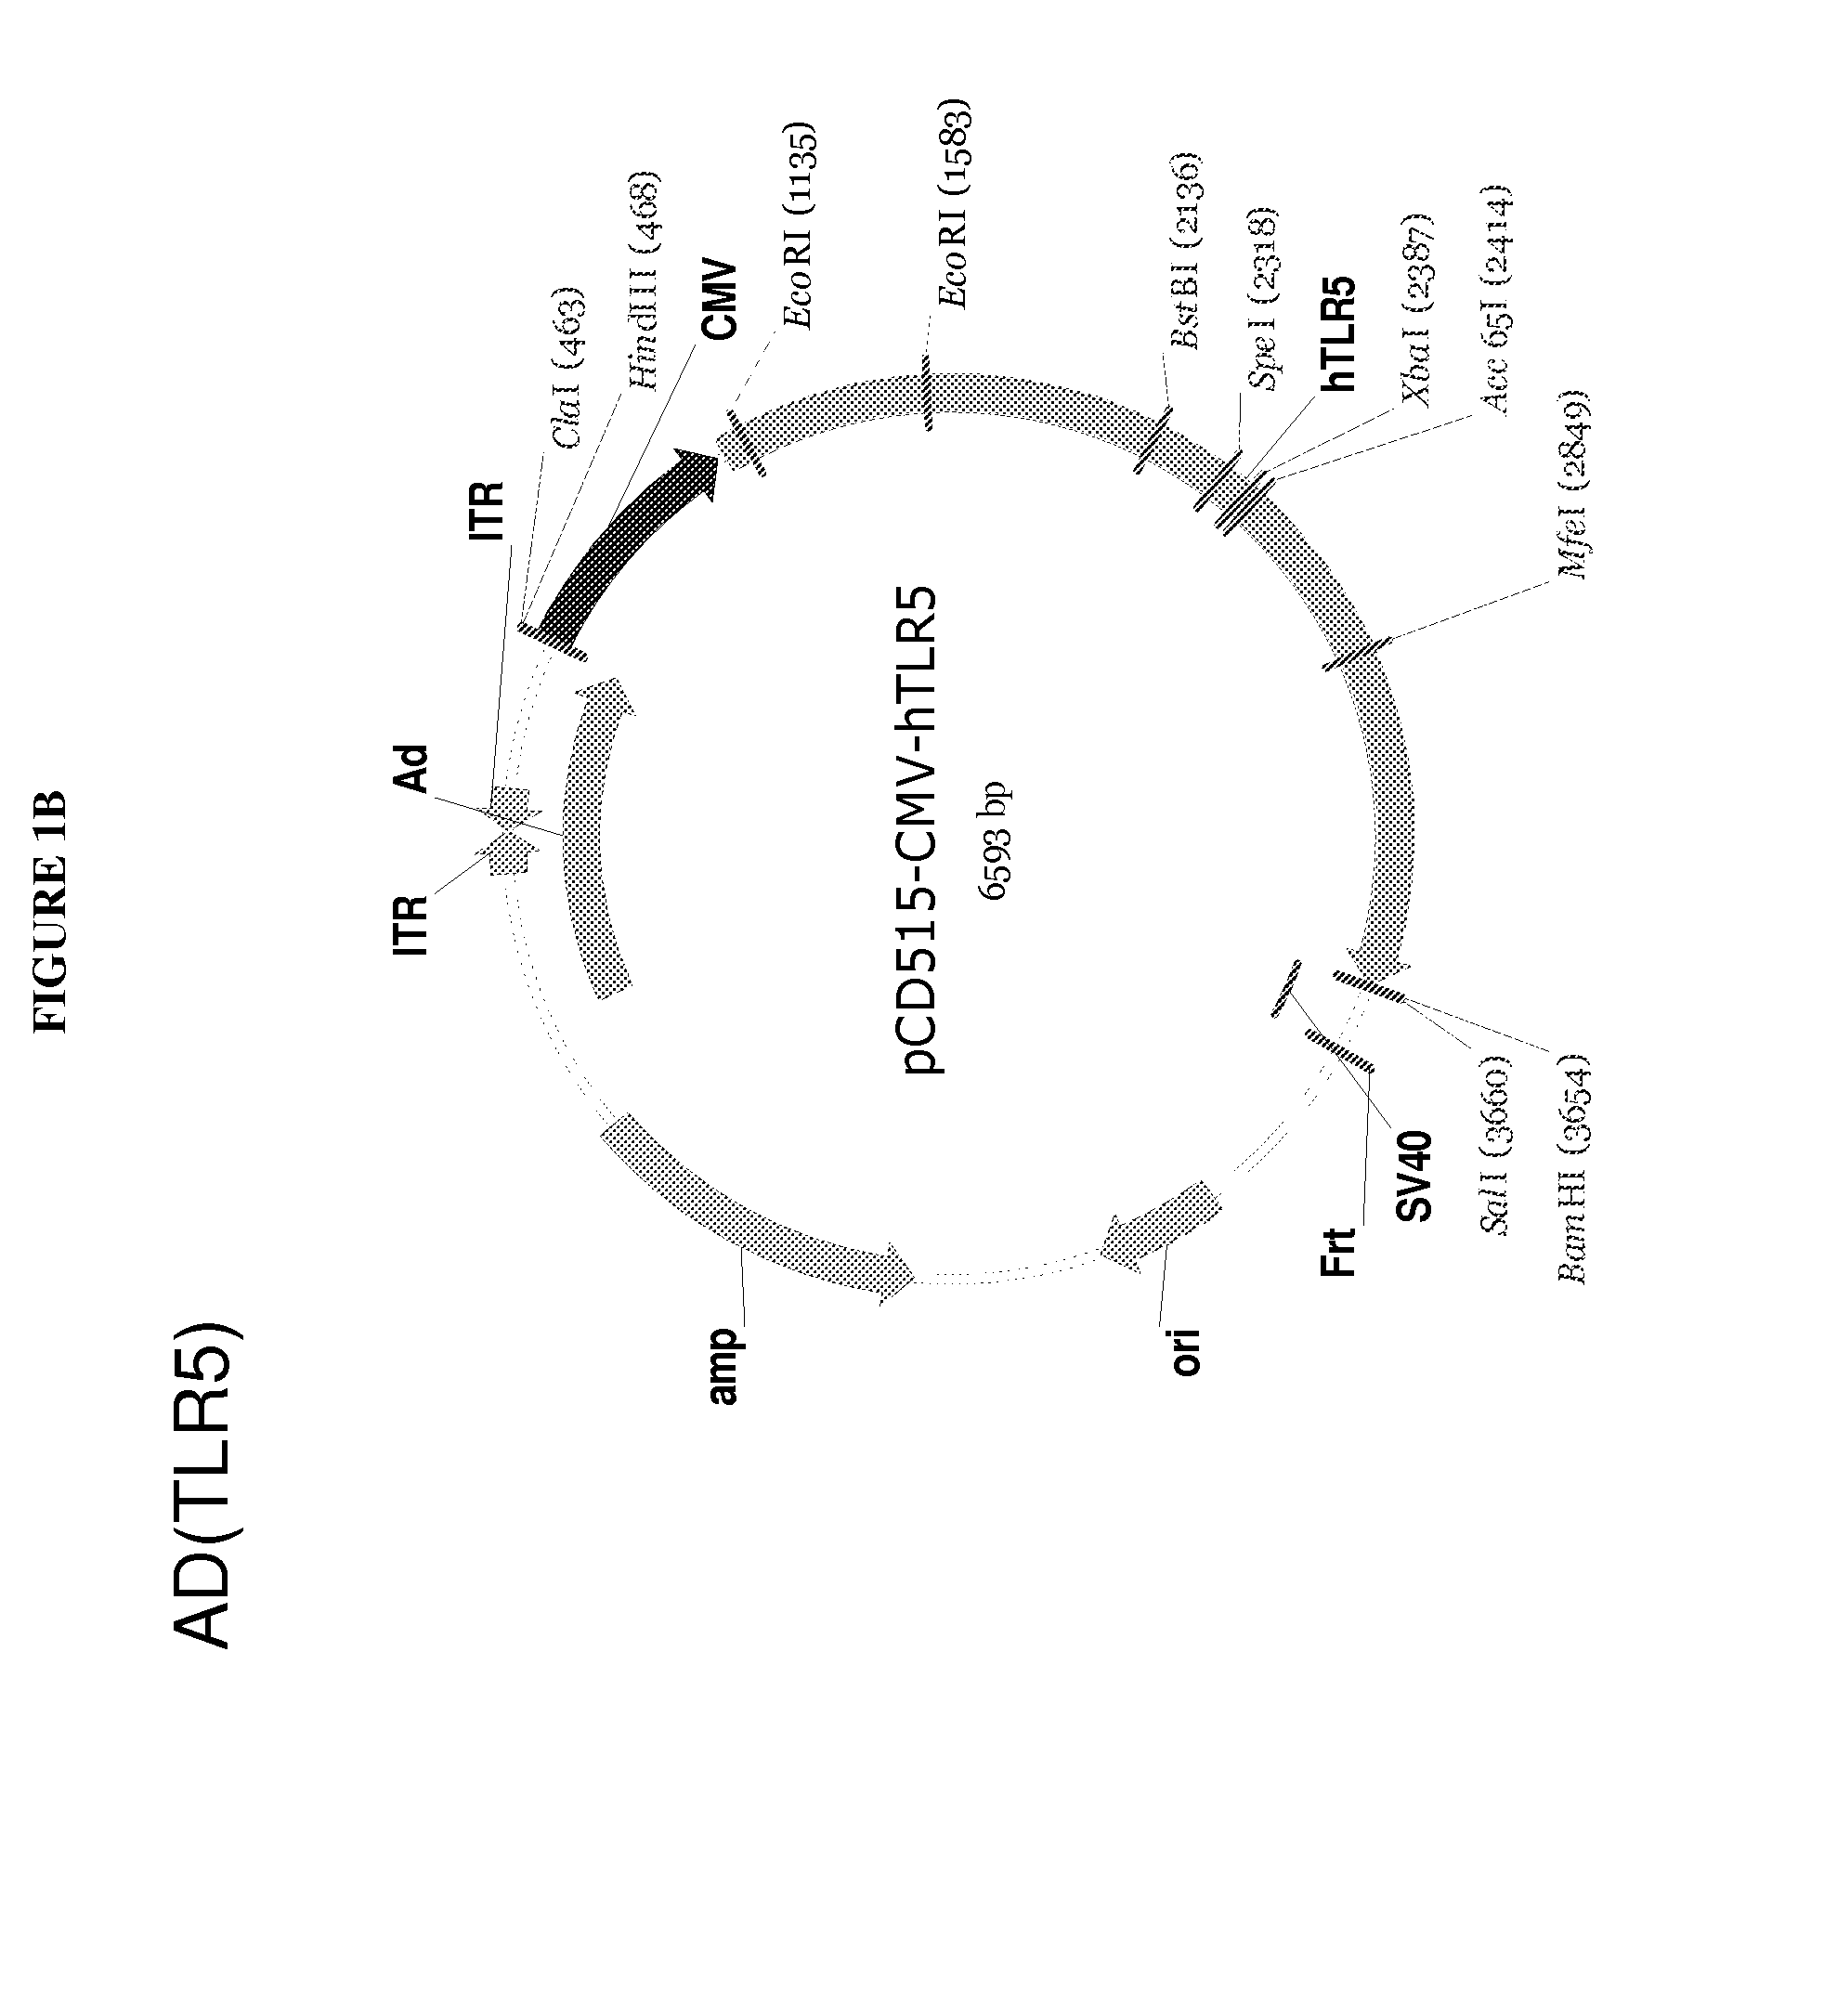 Viral vector encoding a toll-like receptor and encoding a toll-like receptor agonist